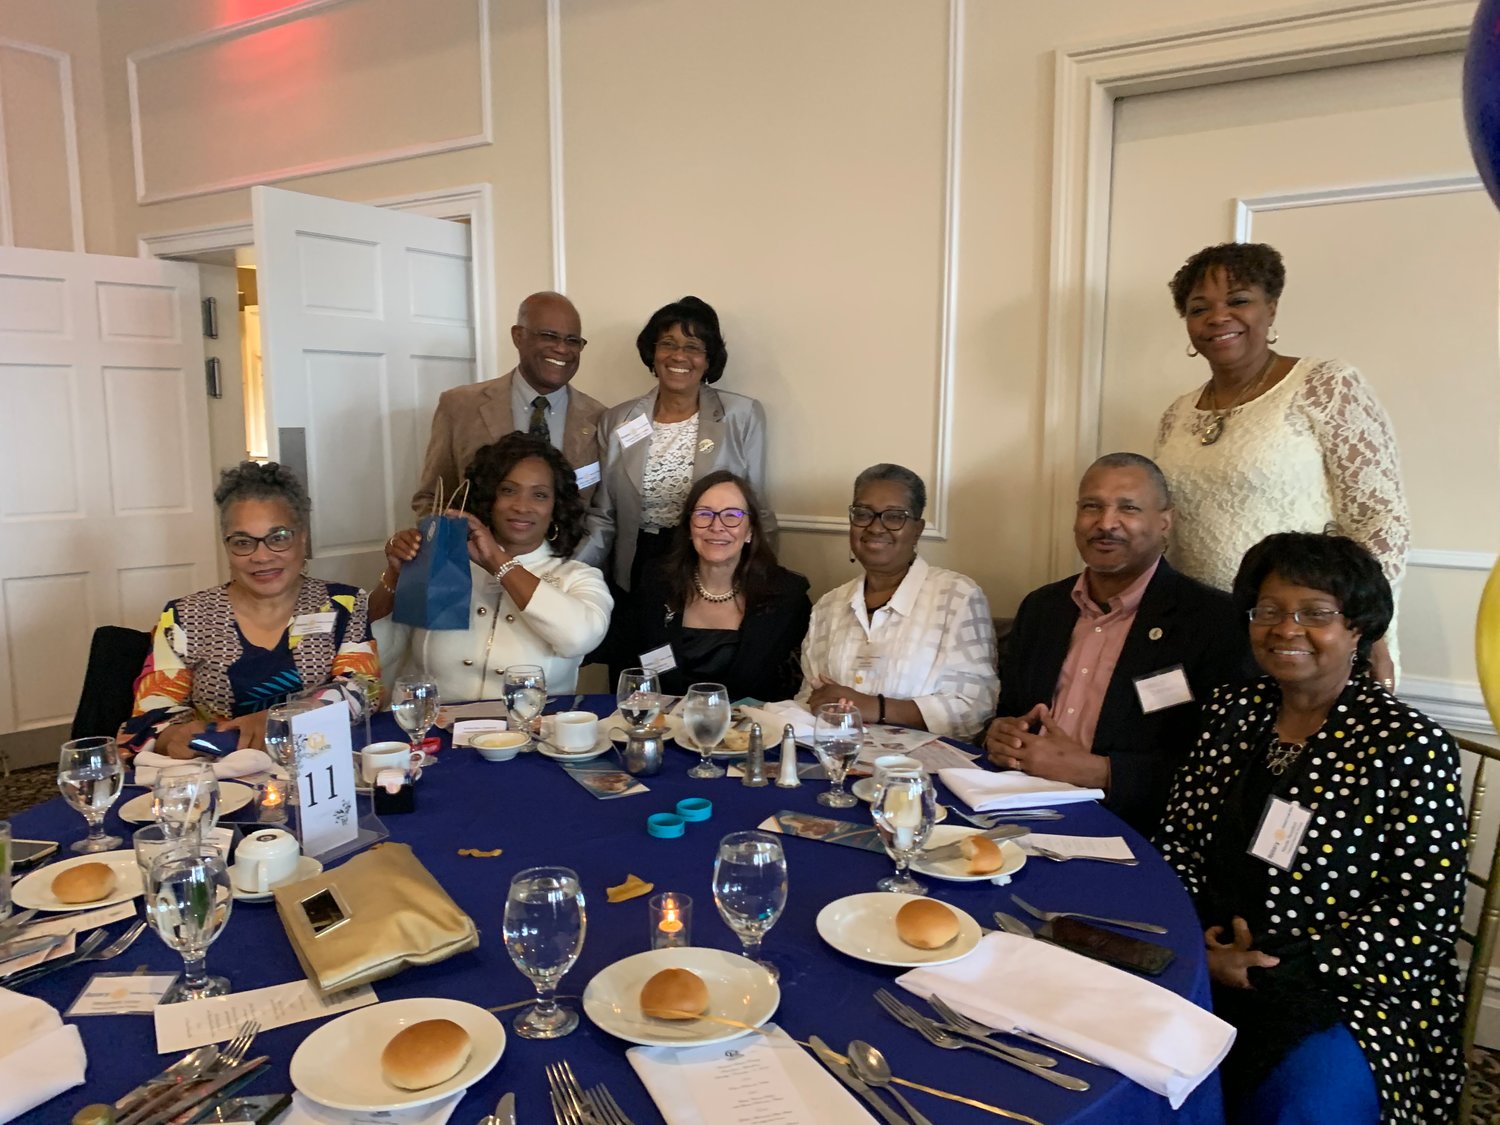 At a Rotary Foundation Luncheon, from left, back row, Eddy Marc-Charles, Florence Marc-Charles, and Margareth Victor. Front row from left, Florence Holly, Dee Dee Harrison, Emily Margulis, Marie Charles, Herold Charles, and Nicole Rosefort.